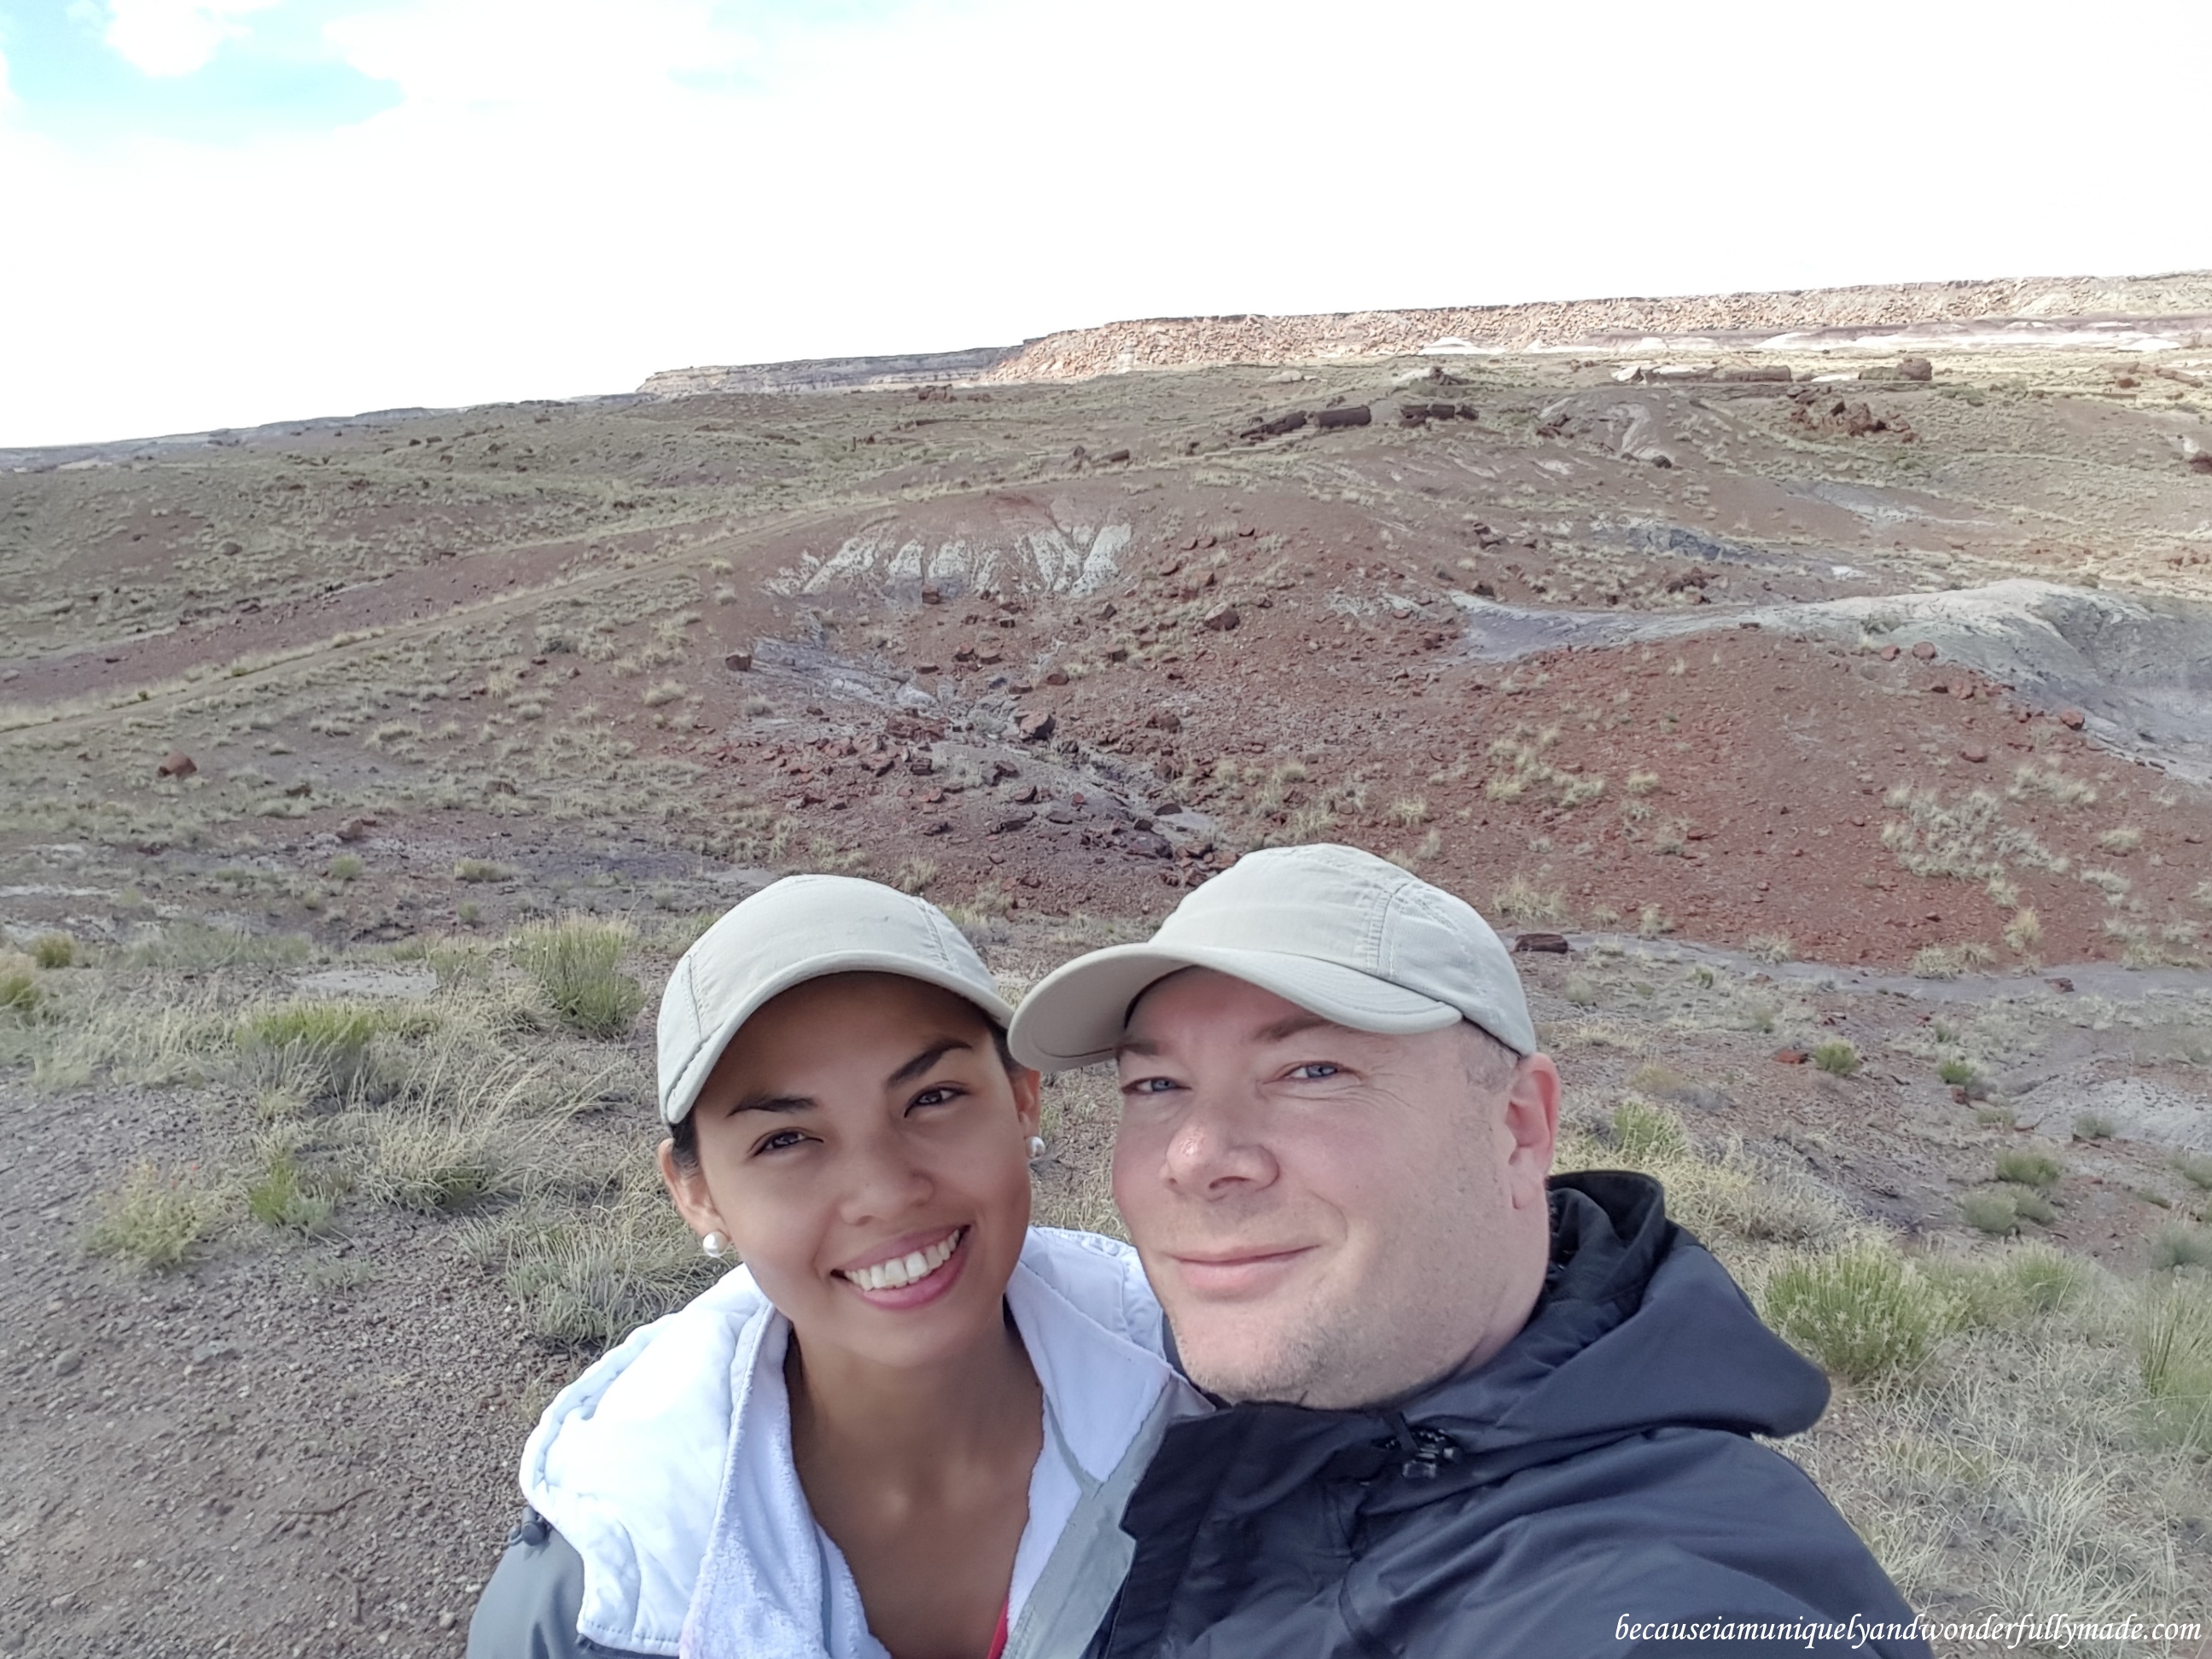 Early spring at Petrified Forest National Park in Arizona and the park is almost all to ourselves.